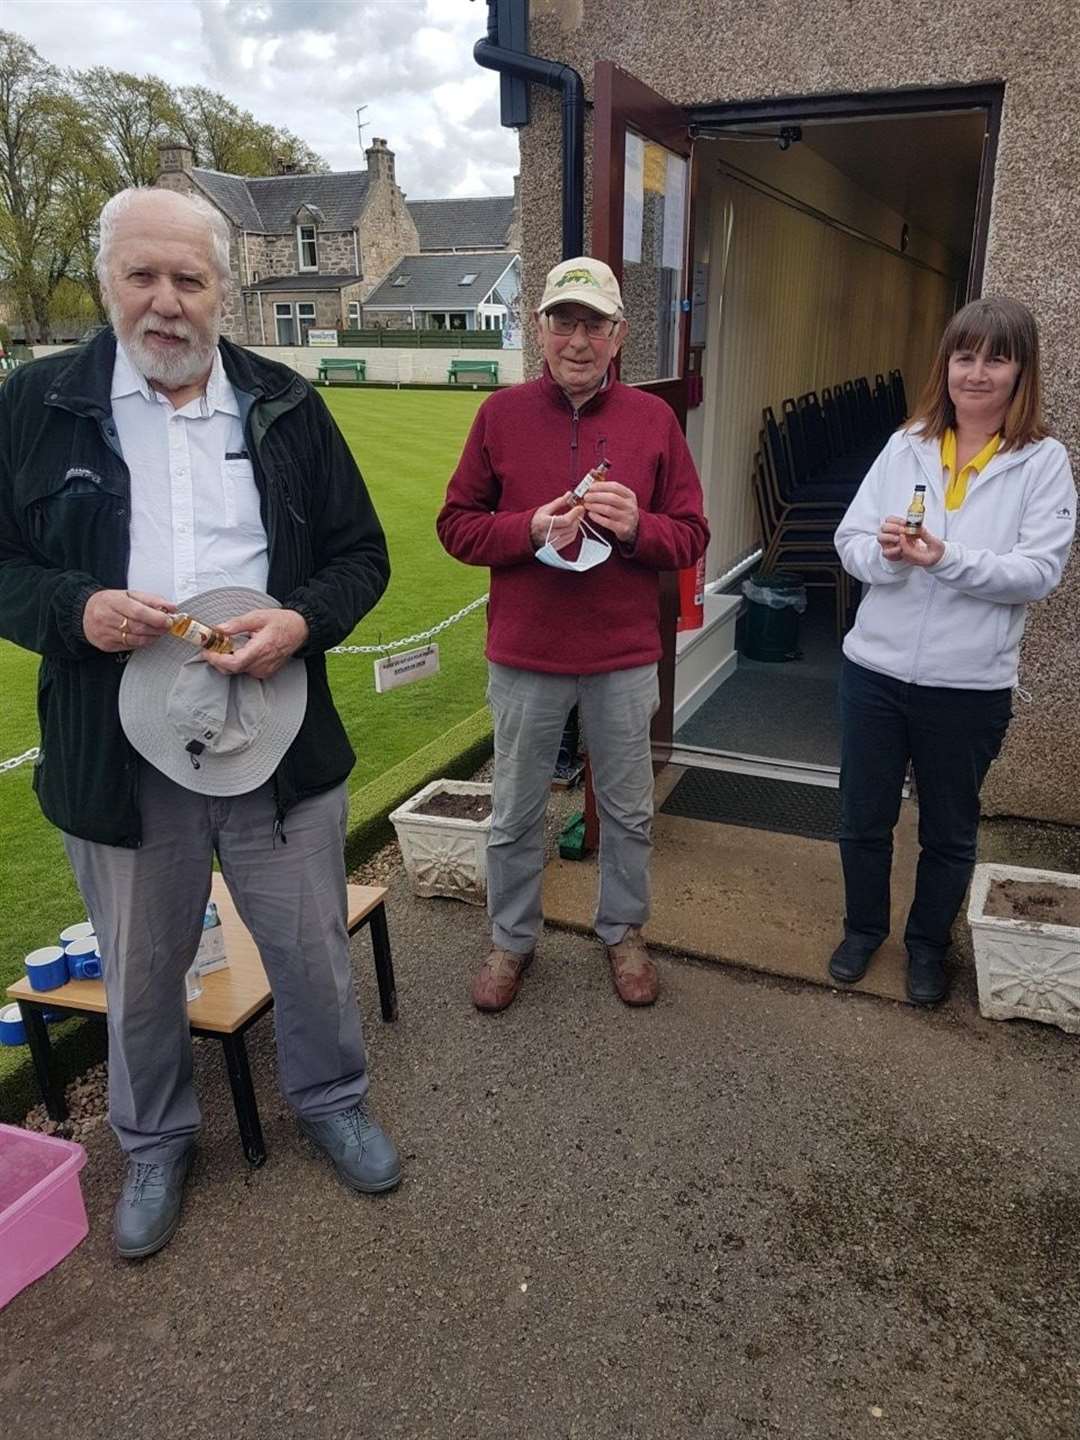 Ed Harris, Ray Boyd and the only female skip, Lesley Coutts, did well on the opening day back to action at Forres Bowling Club.